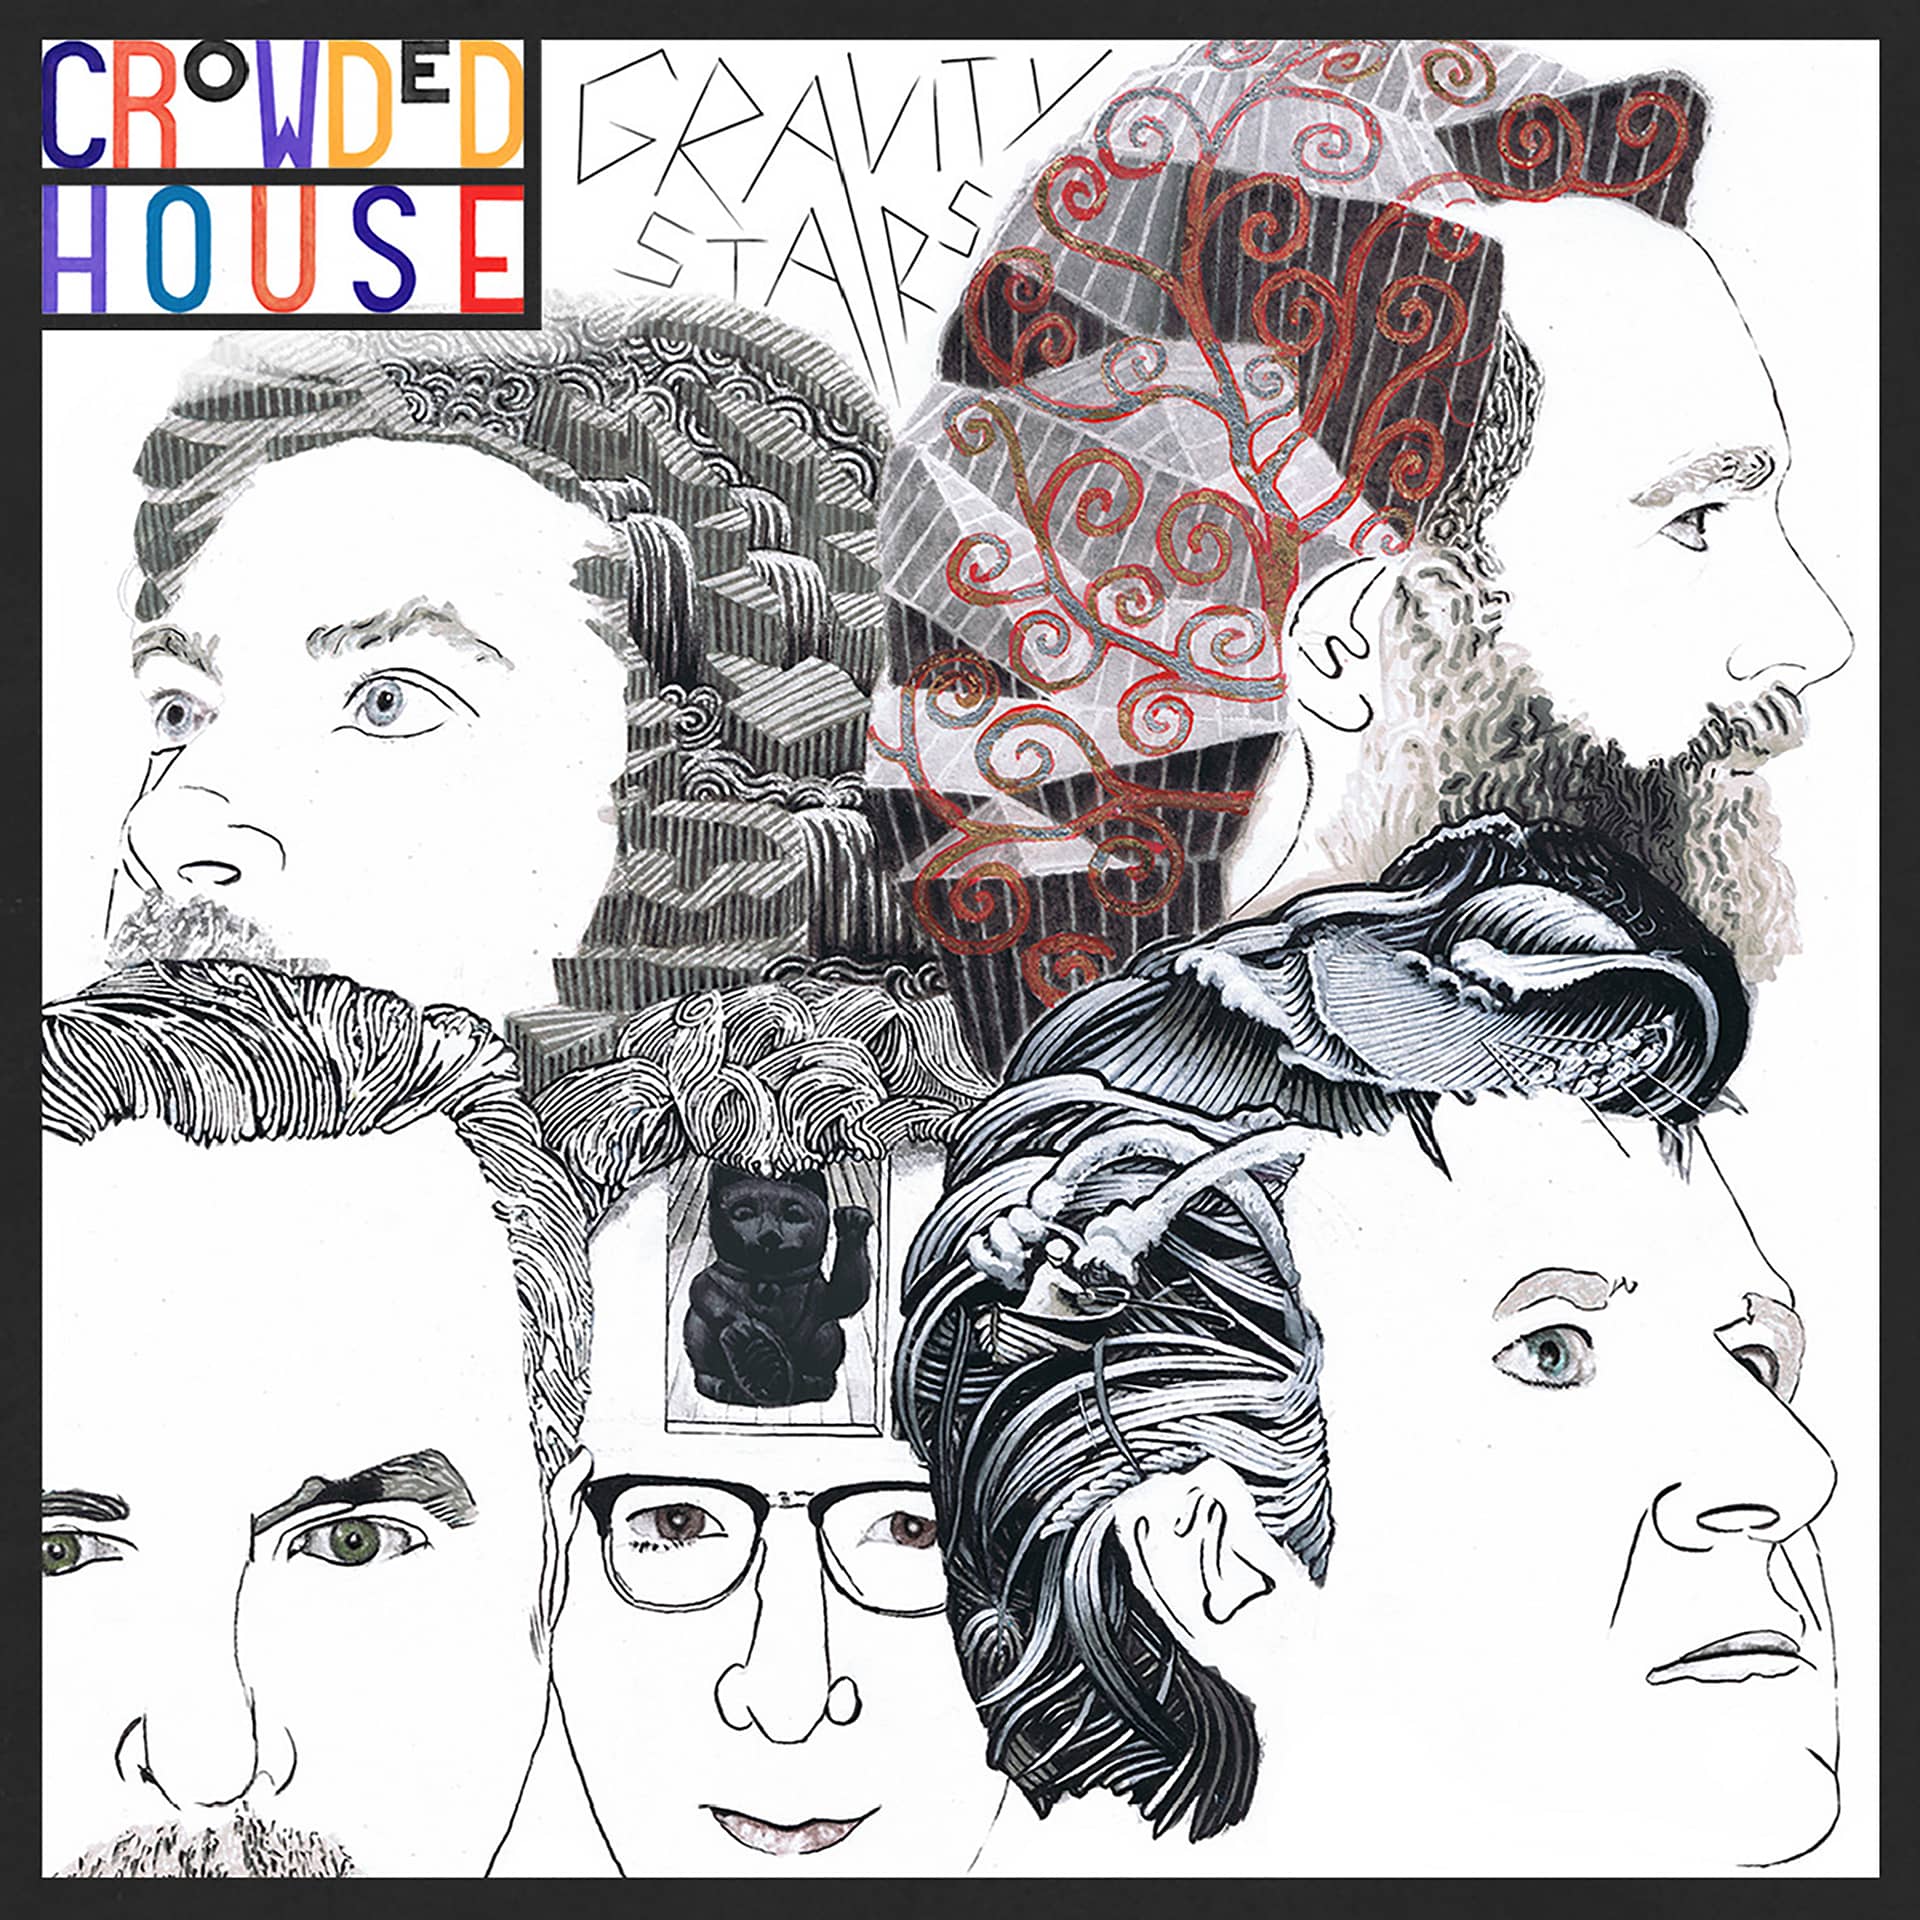 CROWDED HOUSE Release Eighth Studio Album ‘Gravity Stairs’ + Video For New Single ‘The Howl’